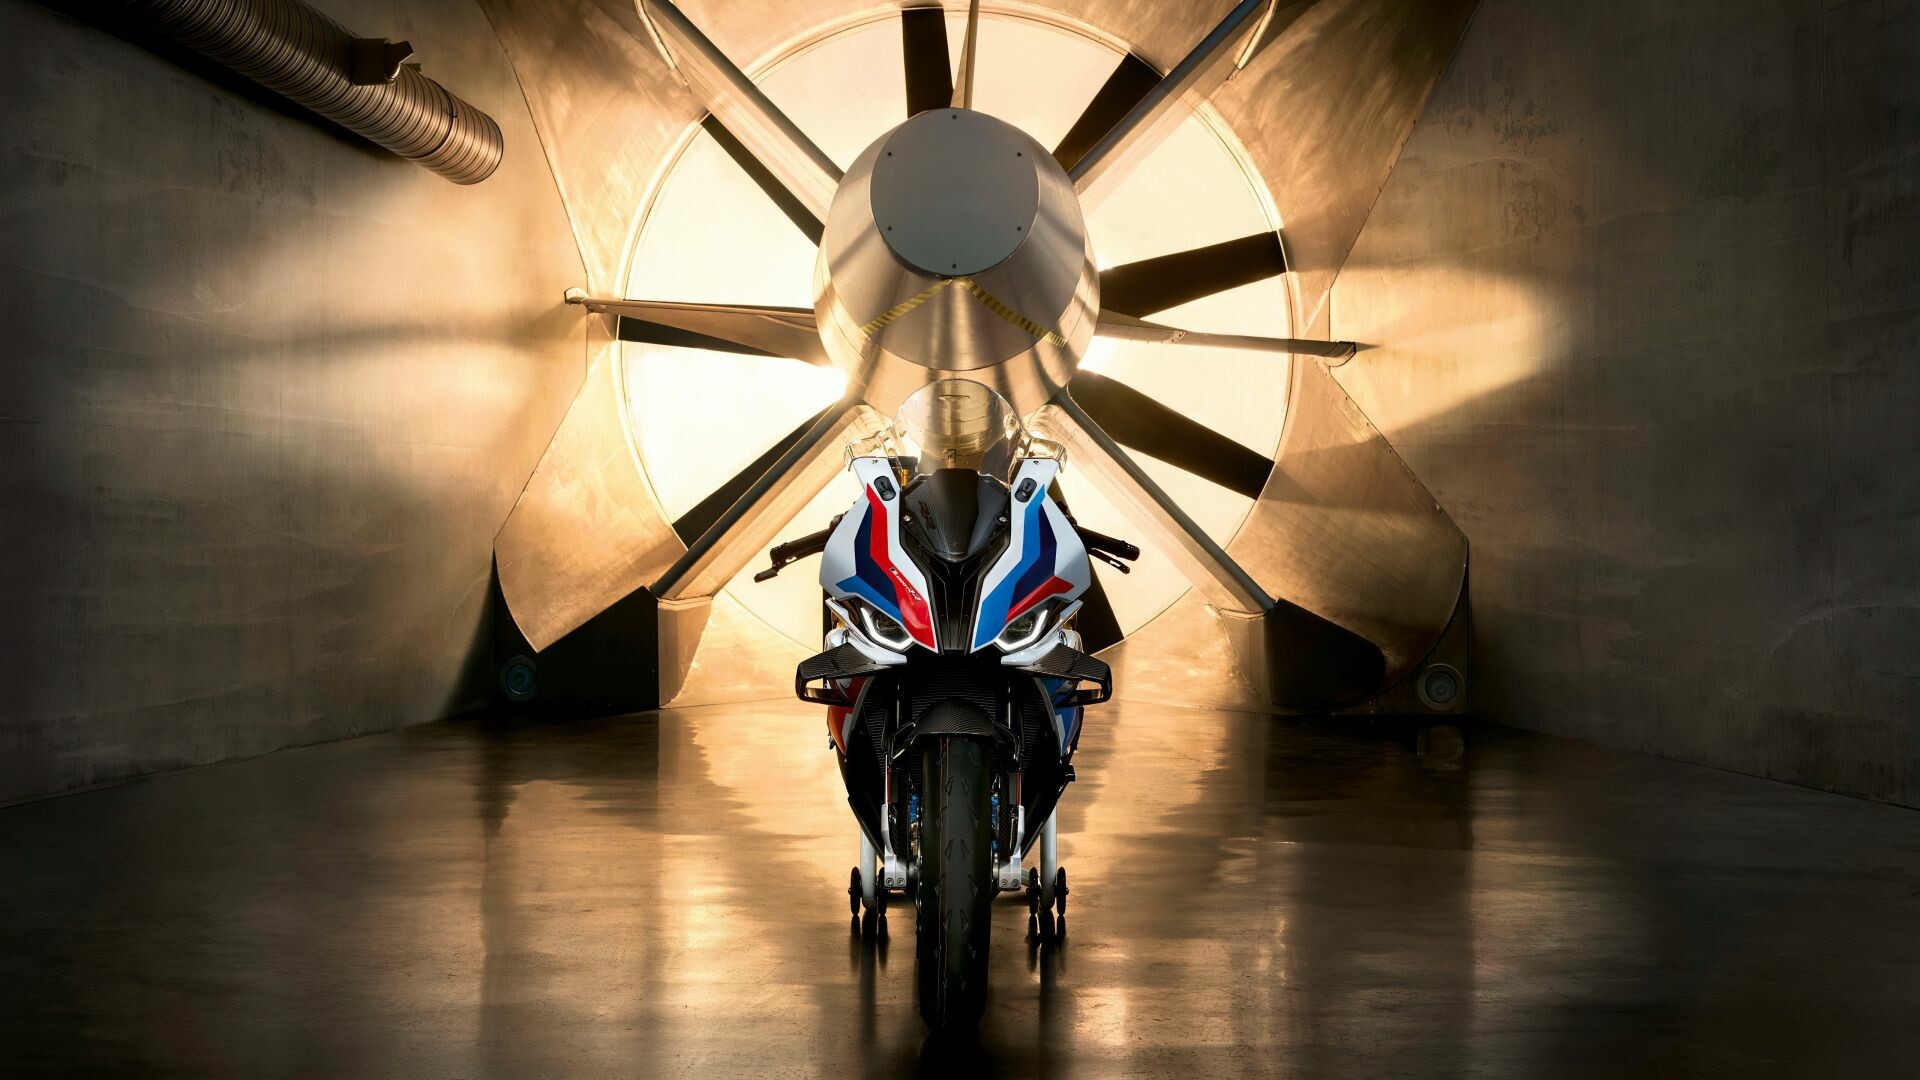 Bike: BMW S1000RR, A race oriented sport motorcycle, Vehicle. 1920x1080 Full HD Background.